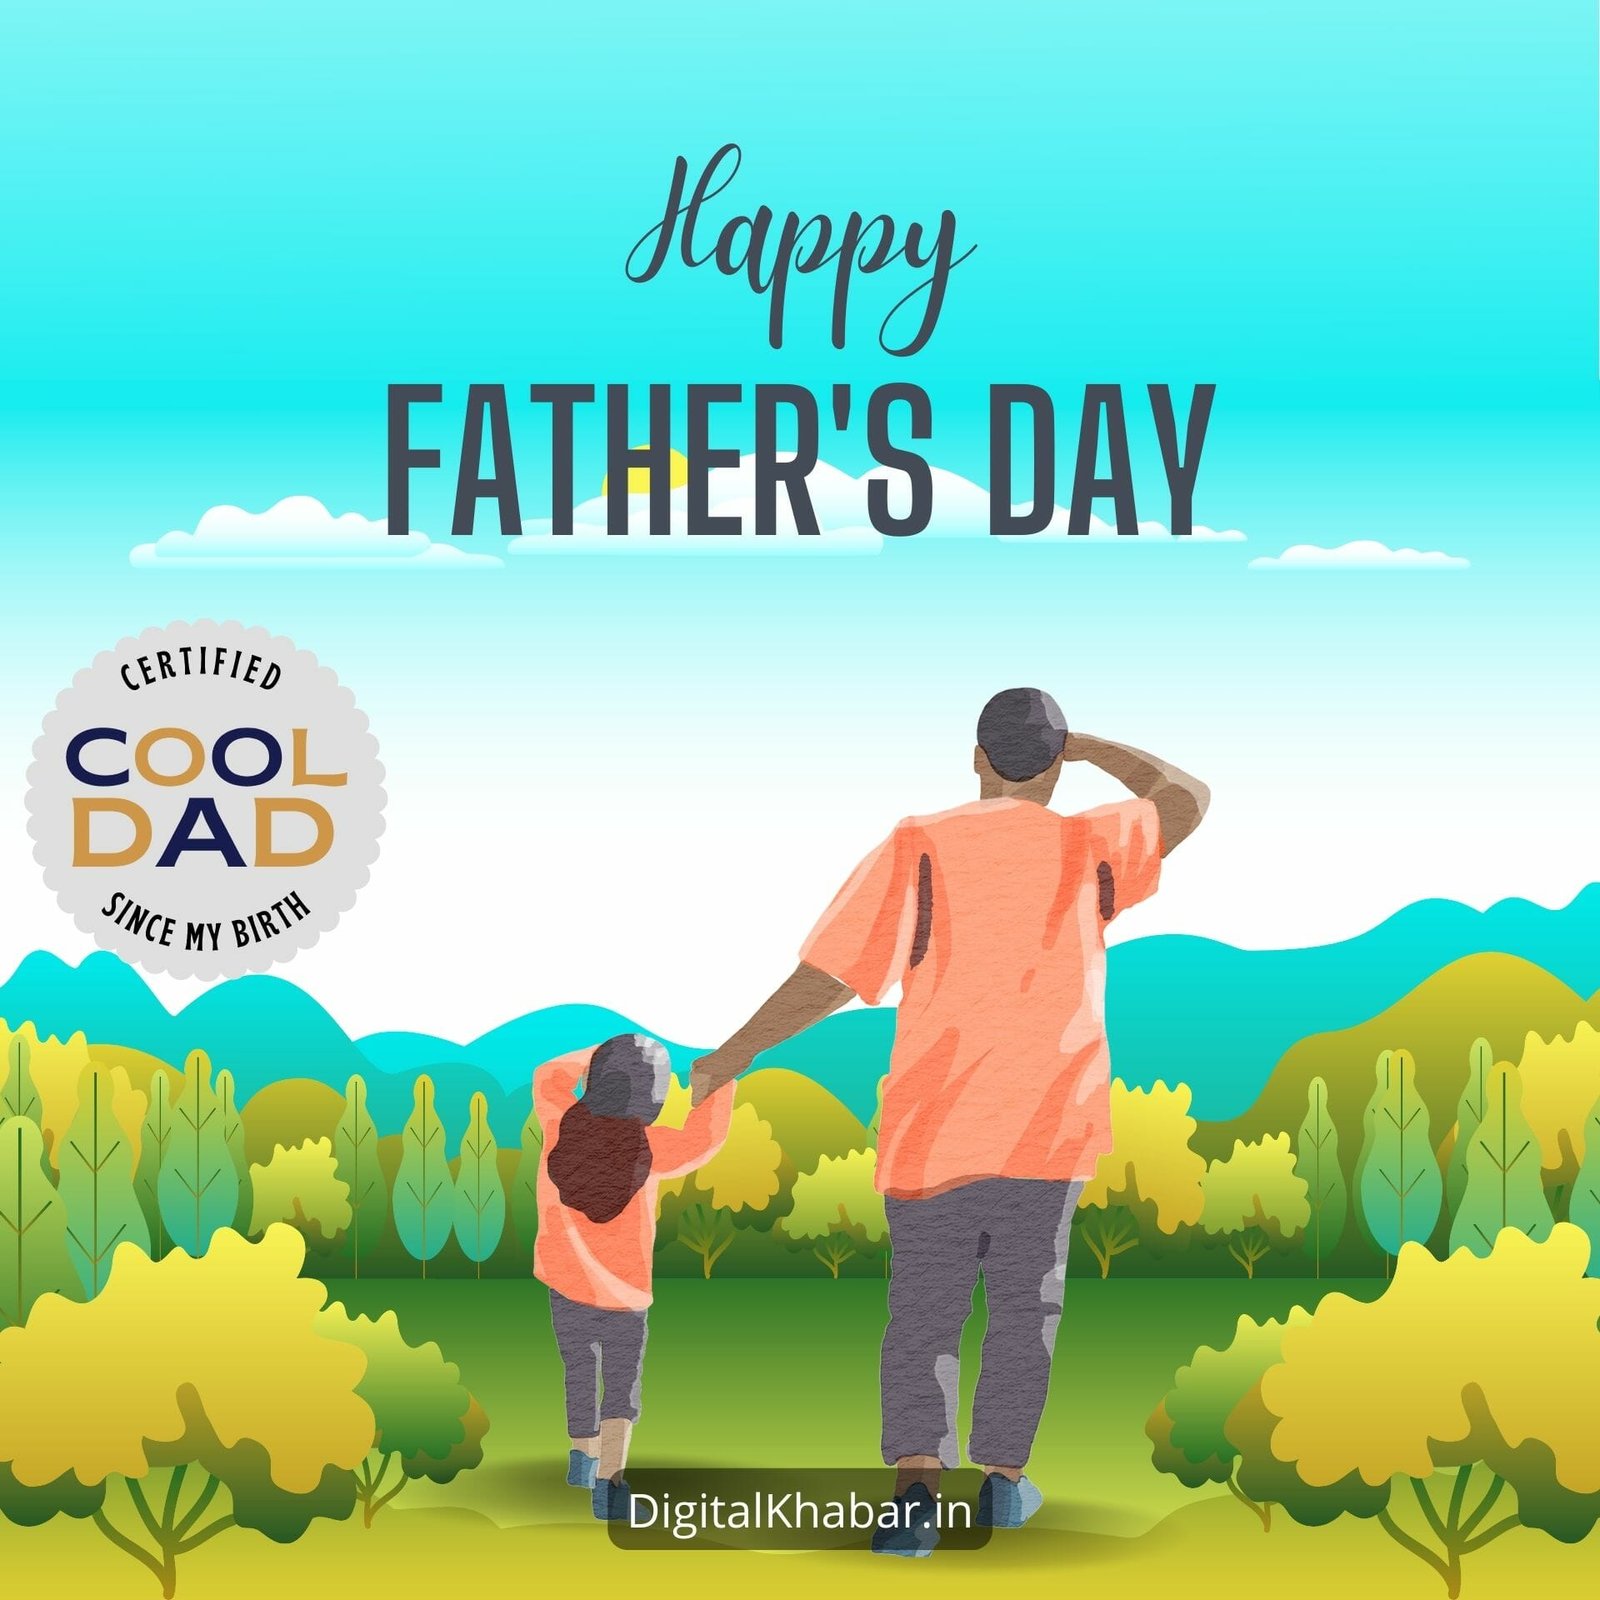 father’s day images and wishes